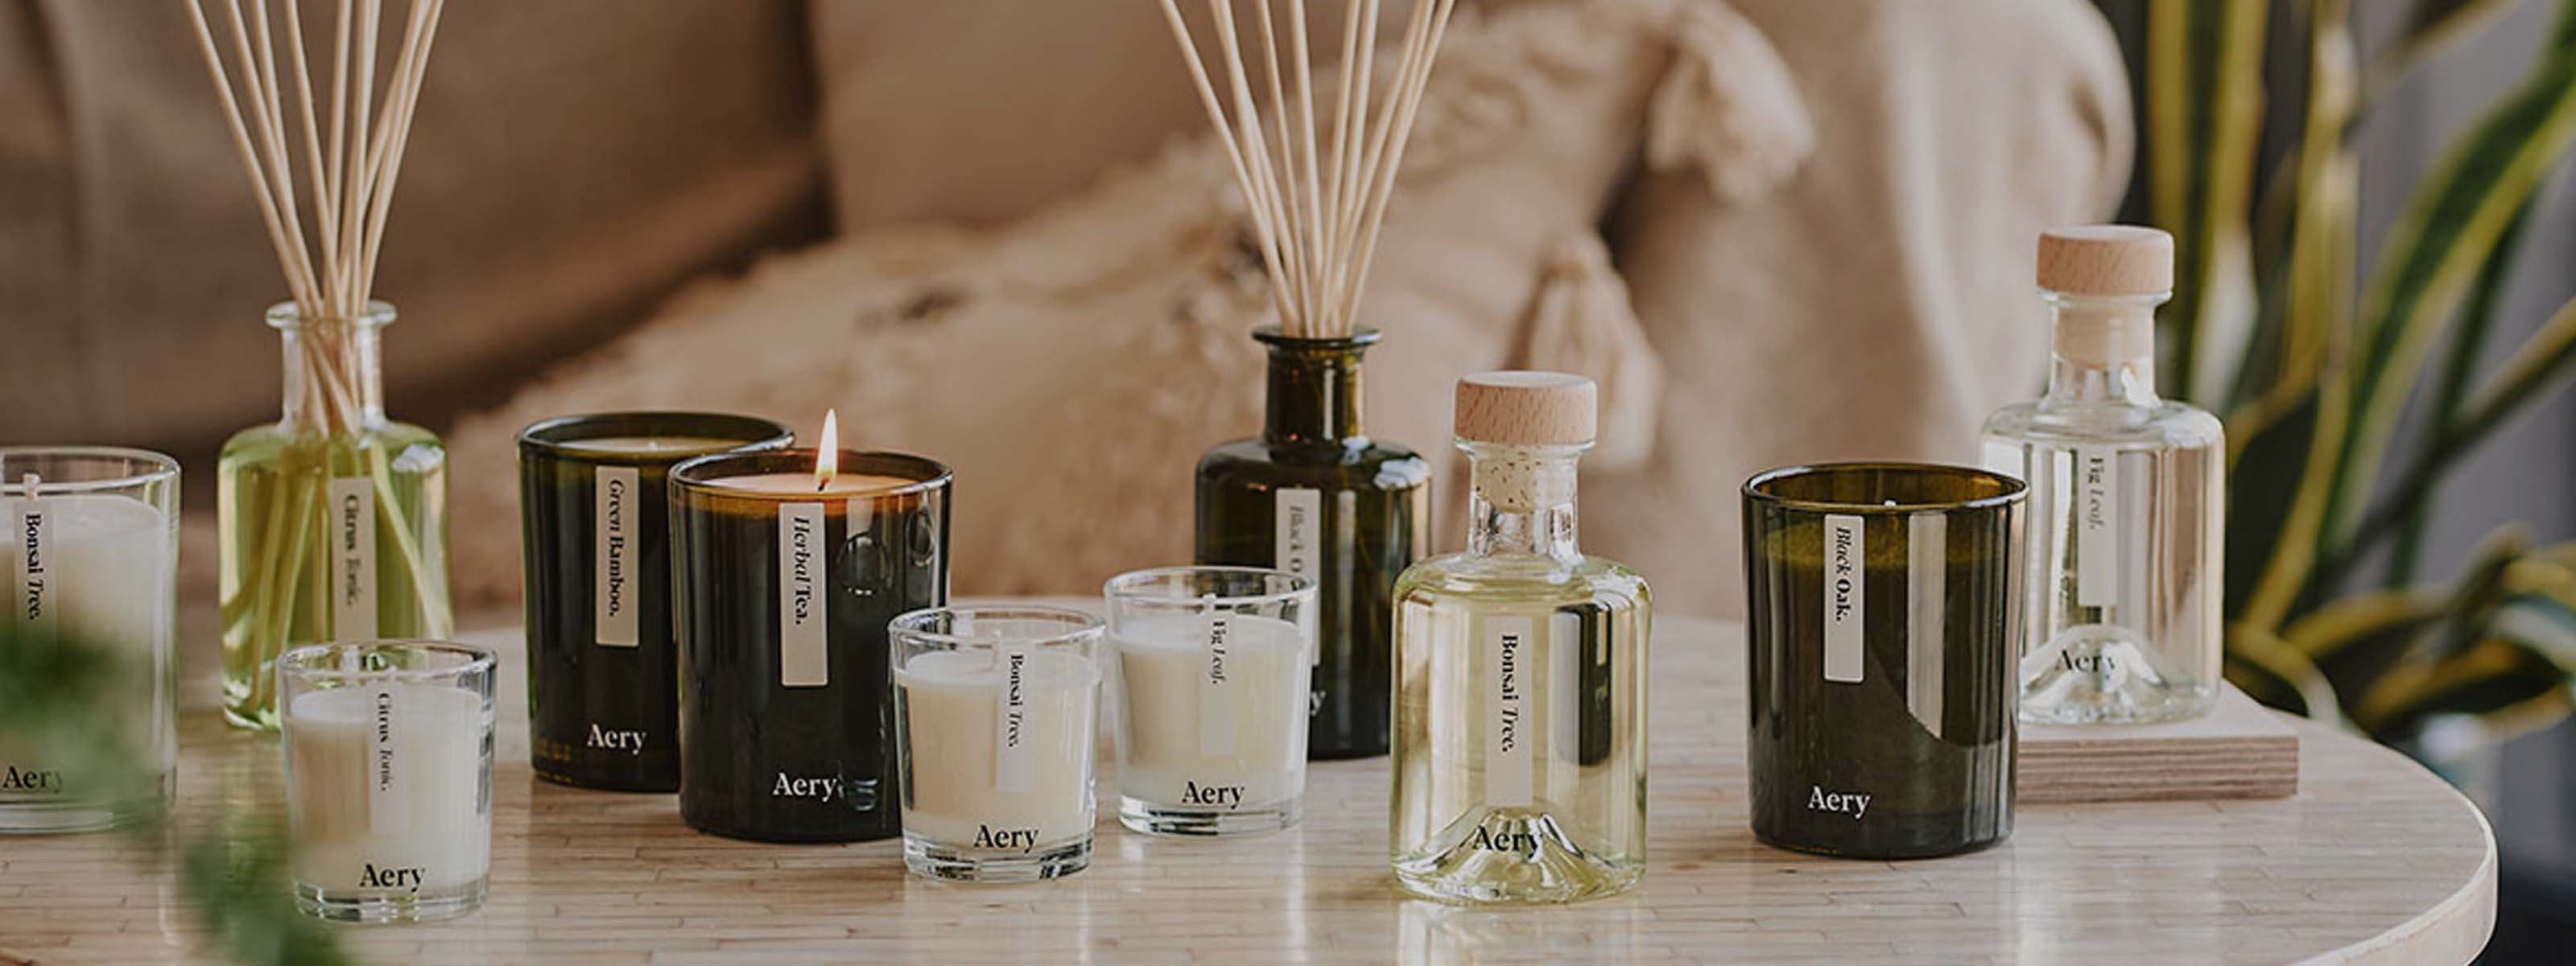 Green Botanical collection of diffusers and candles by Aery displayed on cream circle table 